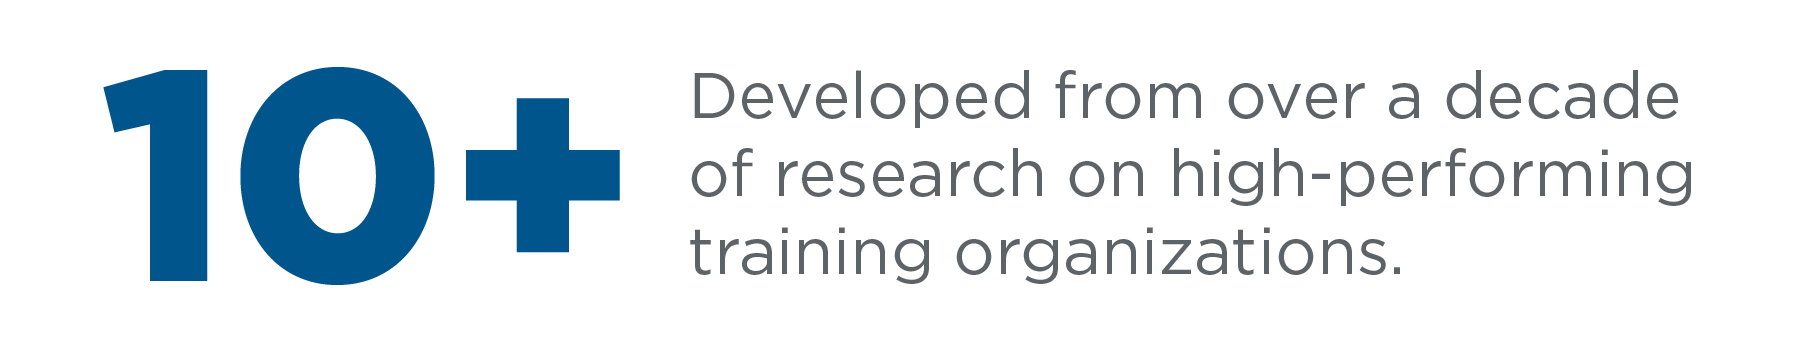 10 plus years developed through over a decade of research on high-performing training organizations